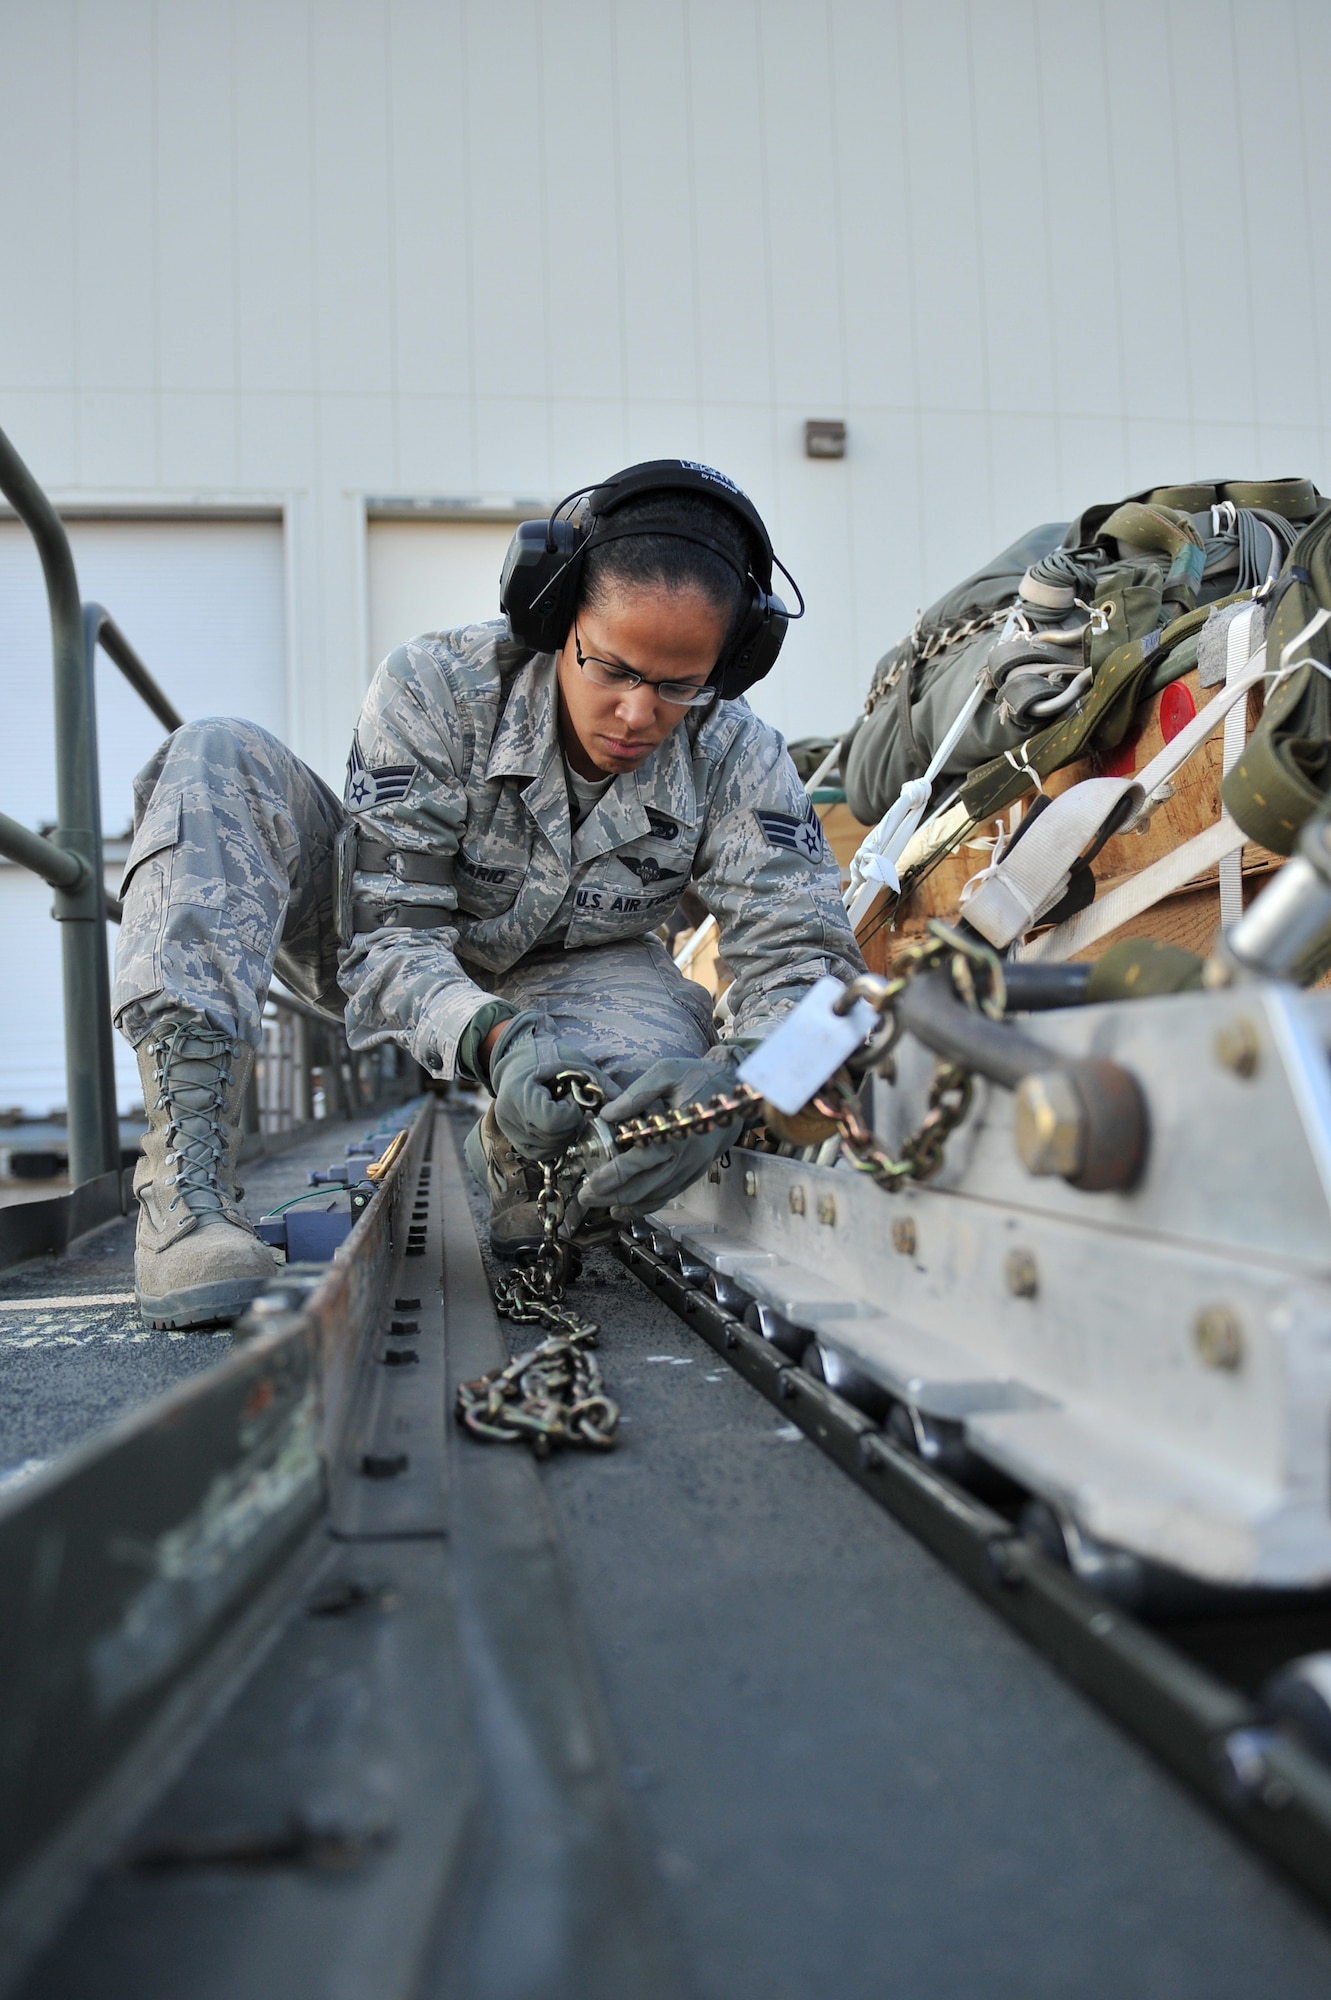 ALTUS AIR FORCE BASE, Okla. – U.S. Air Force Senior Airman Rangeline Rosario, 97th Logistics Readiness Squadron air transportation journeyman, secures a cargo pallet onto a Tunner 60K aircraft cargo loader Oct. 30, 2014. Once the pallet is secured onto the cargo loader, it can be transported to the U.S. Air Force C-17 Globemaster III cargo aircraft for used in an airdrop training mission by the 58th Airlift Squadron. (U.S. Air Force Photo by Senior Airman Dillon Davis/Released)